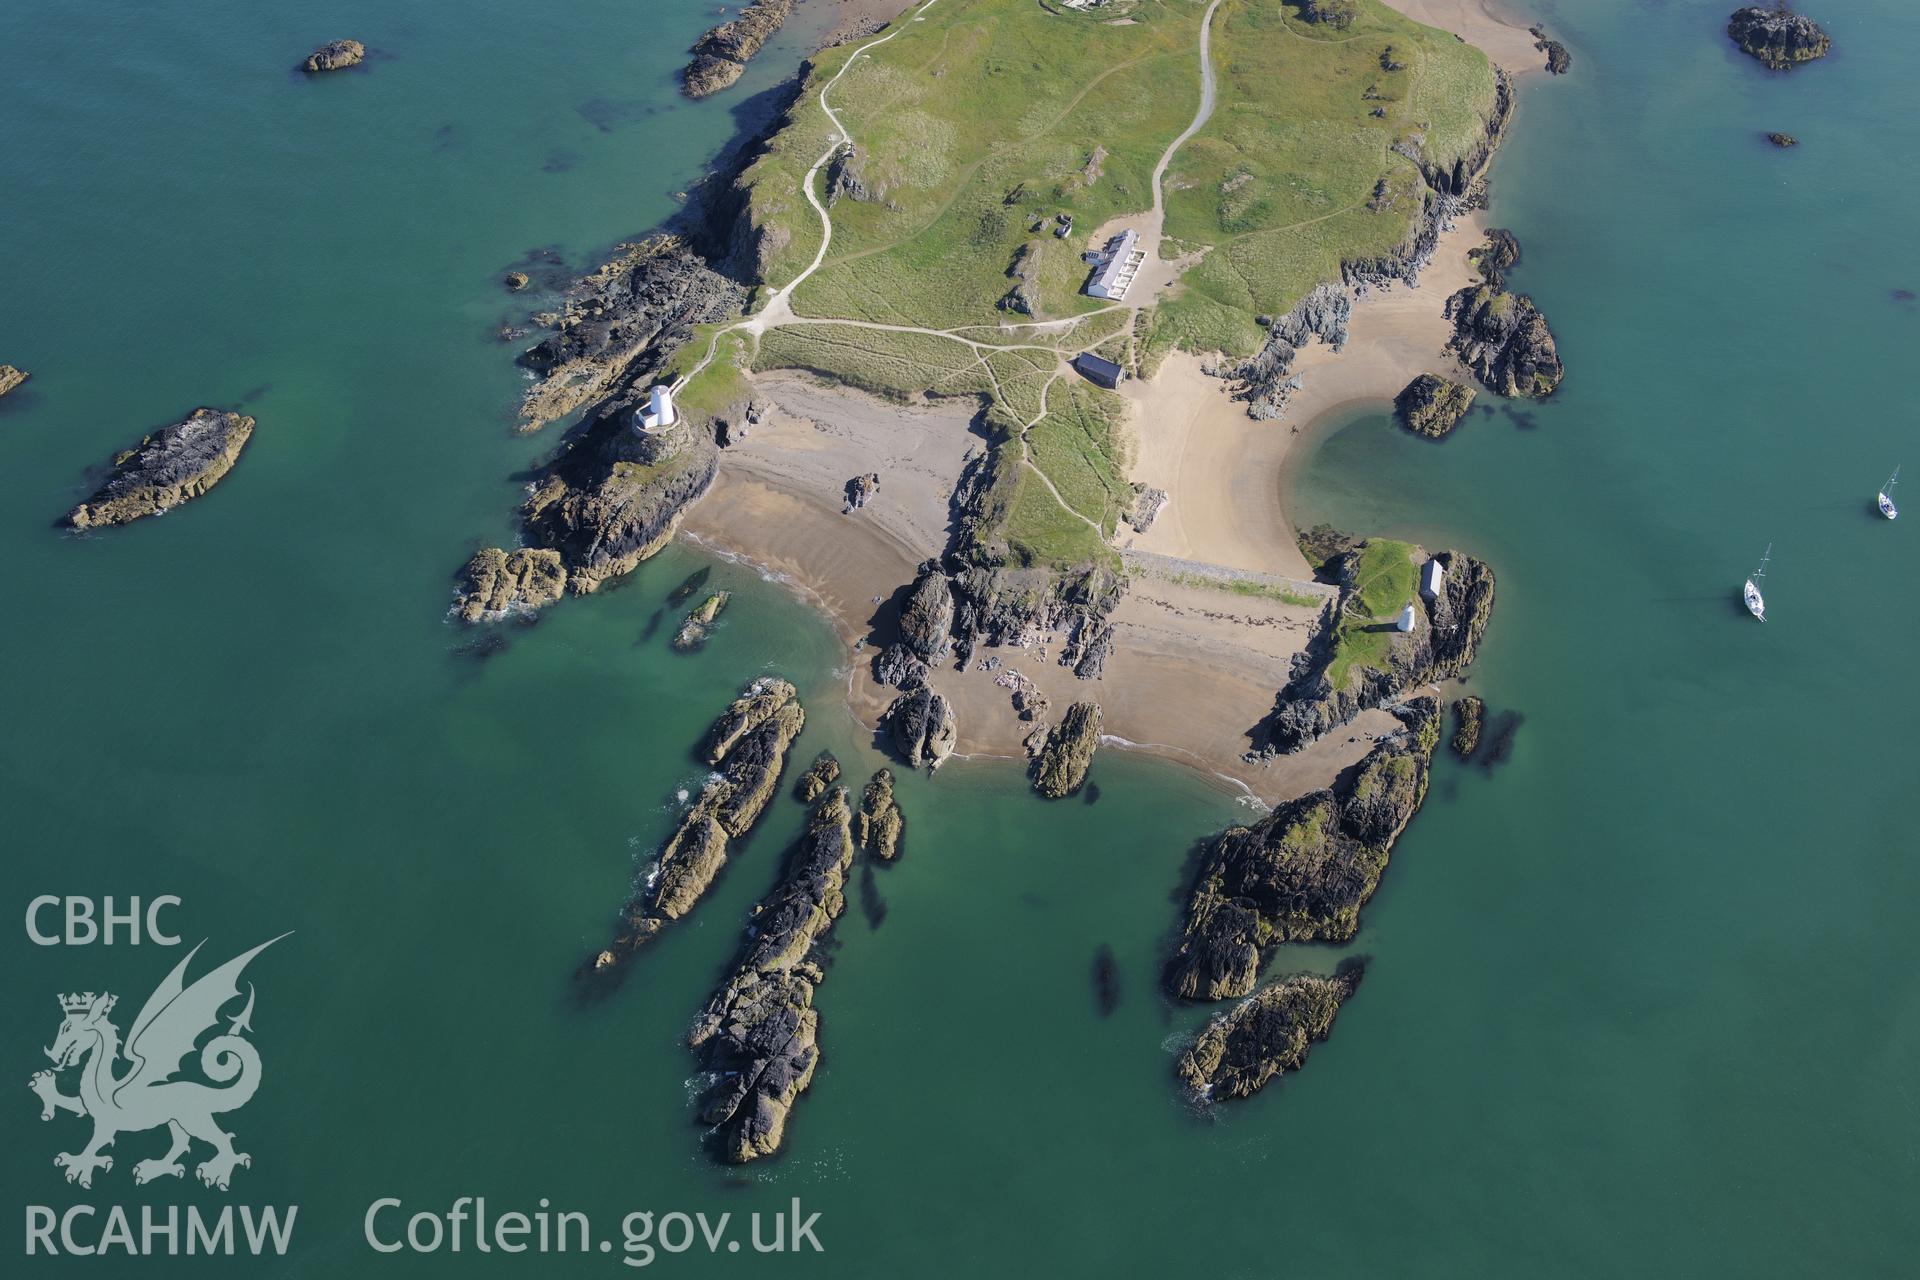 The lighthouse, tower, and pilot's house on Llanddwyn Island. Oblique aerial photograph taken during the Royal Commission's programme of archaeological aerial reconnaissance by Toby Driver on 23rd June 2015.